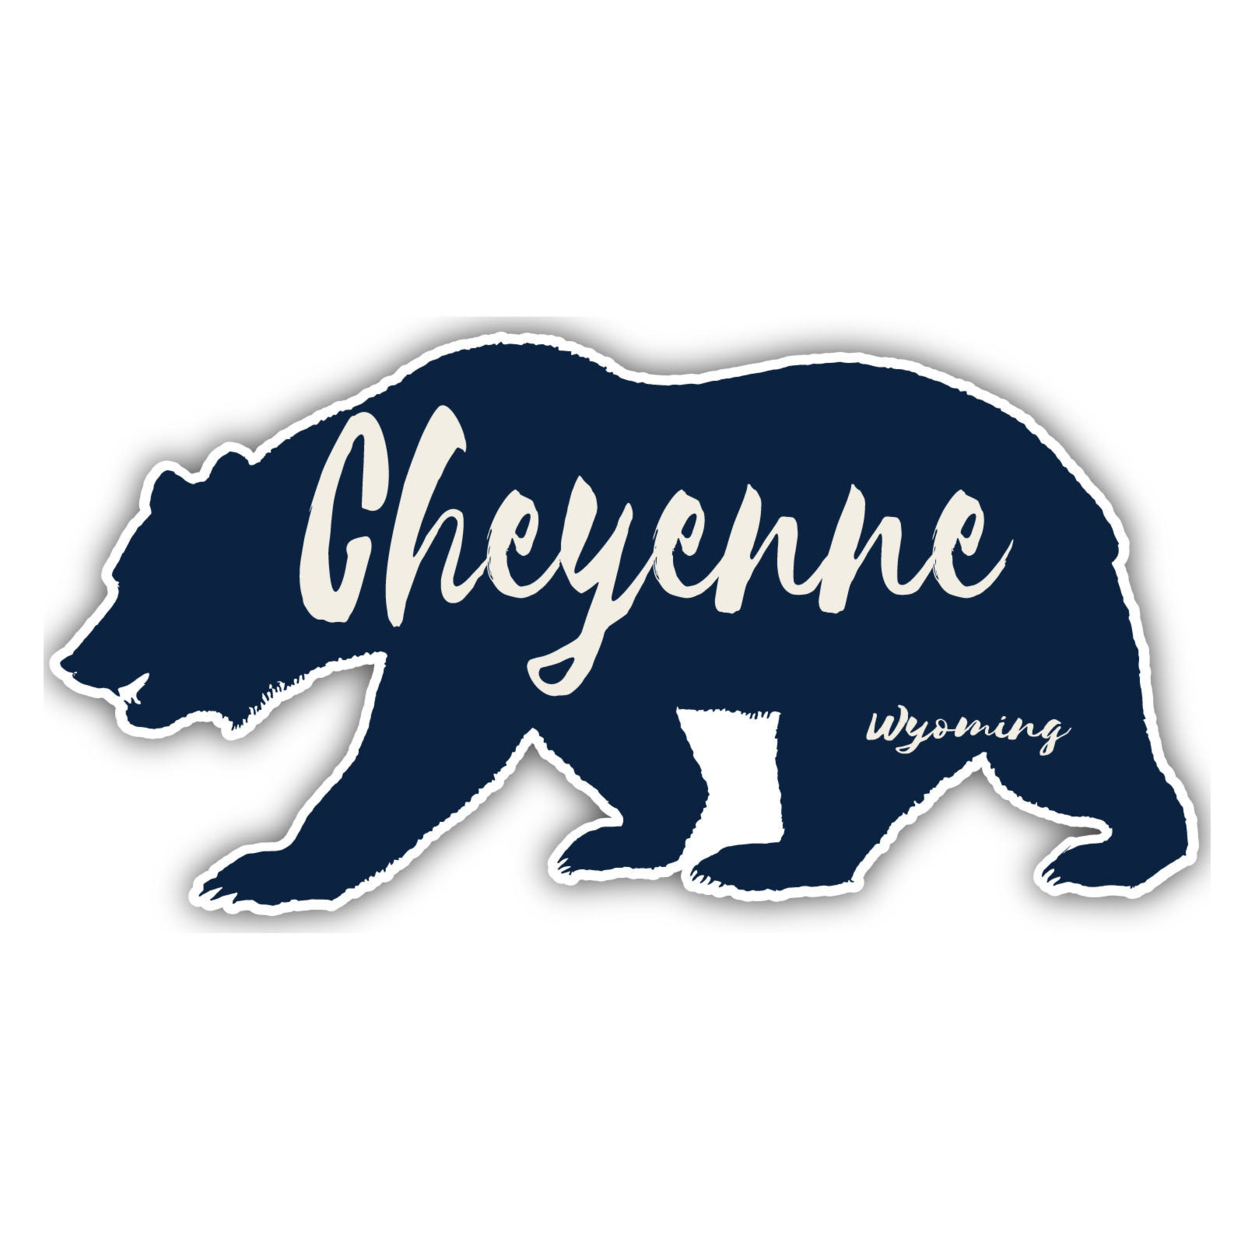 Cheyenne Wyoming Souvenir Decorative Stickers (Choose Theme And Size) - Single Unit, 10-Inch, Camp Life